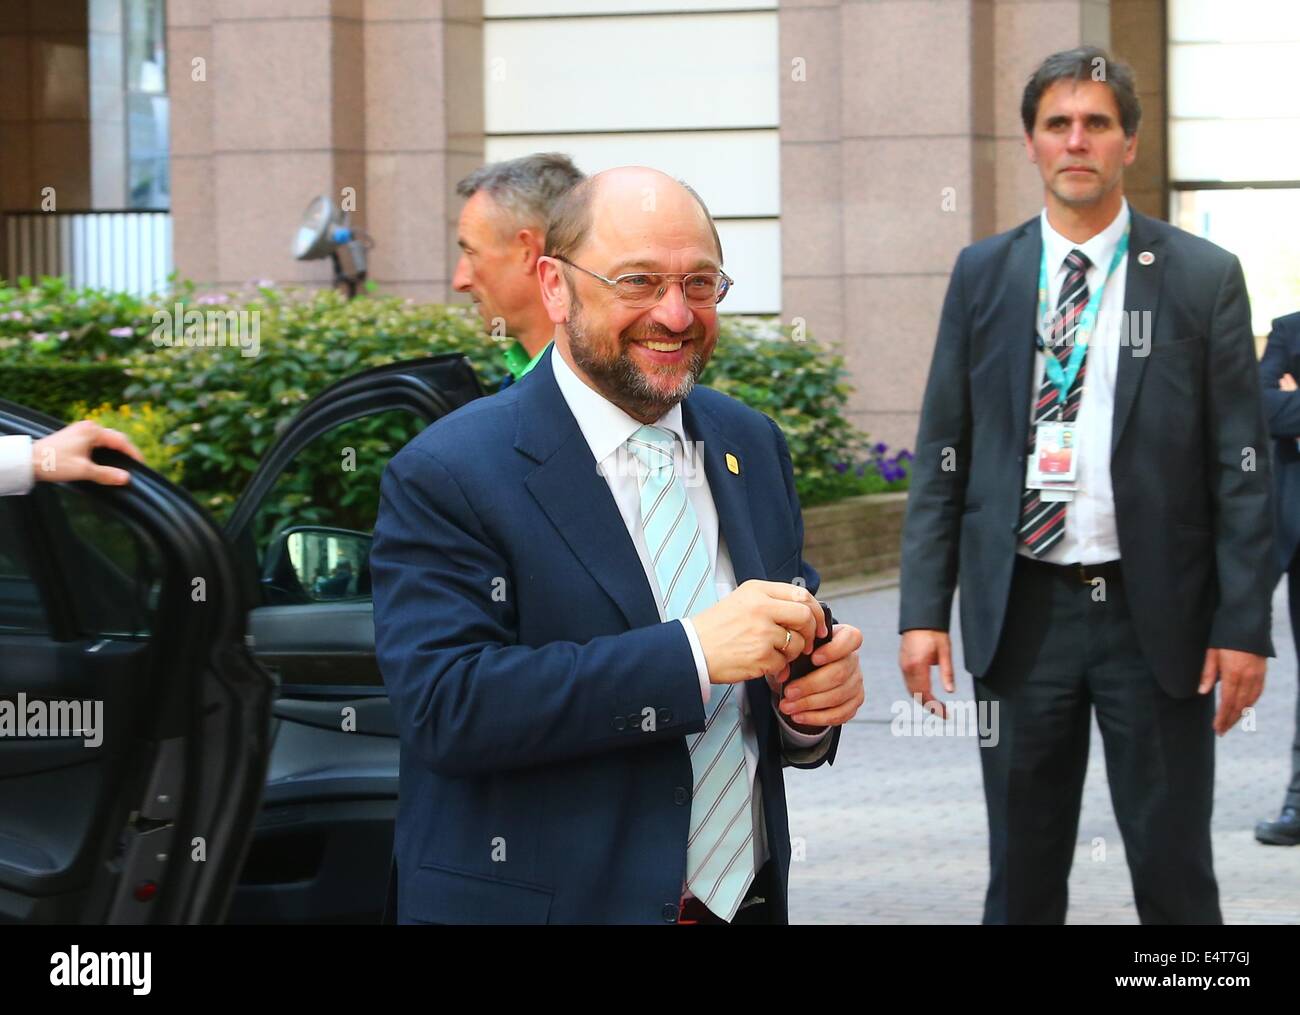 Brussels, Belgium. 16th July, 2014. European Parliament President Martin Schulz arrives to attend the Special Meeting of the European Council at the EU headquarters in Brussels, capital of Belgium, July 16, 2014. Credit:  Gong Bing/Xinhua/Alamy Live News Stock Photo